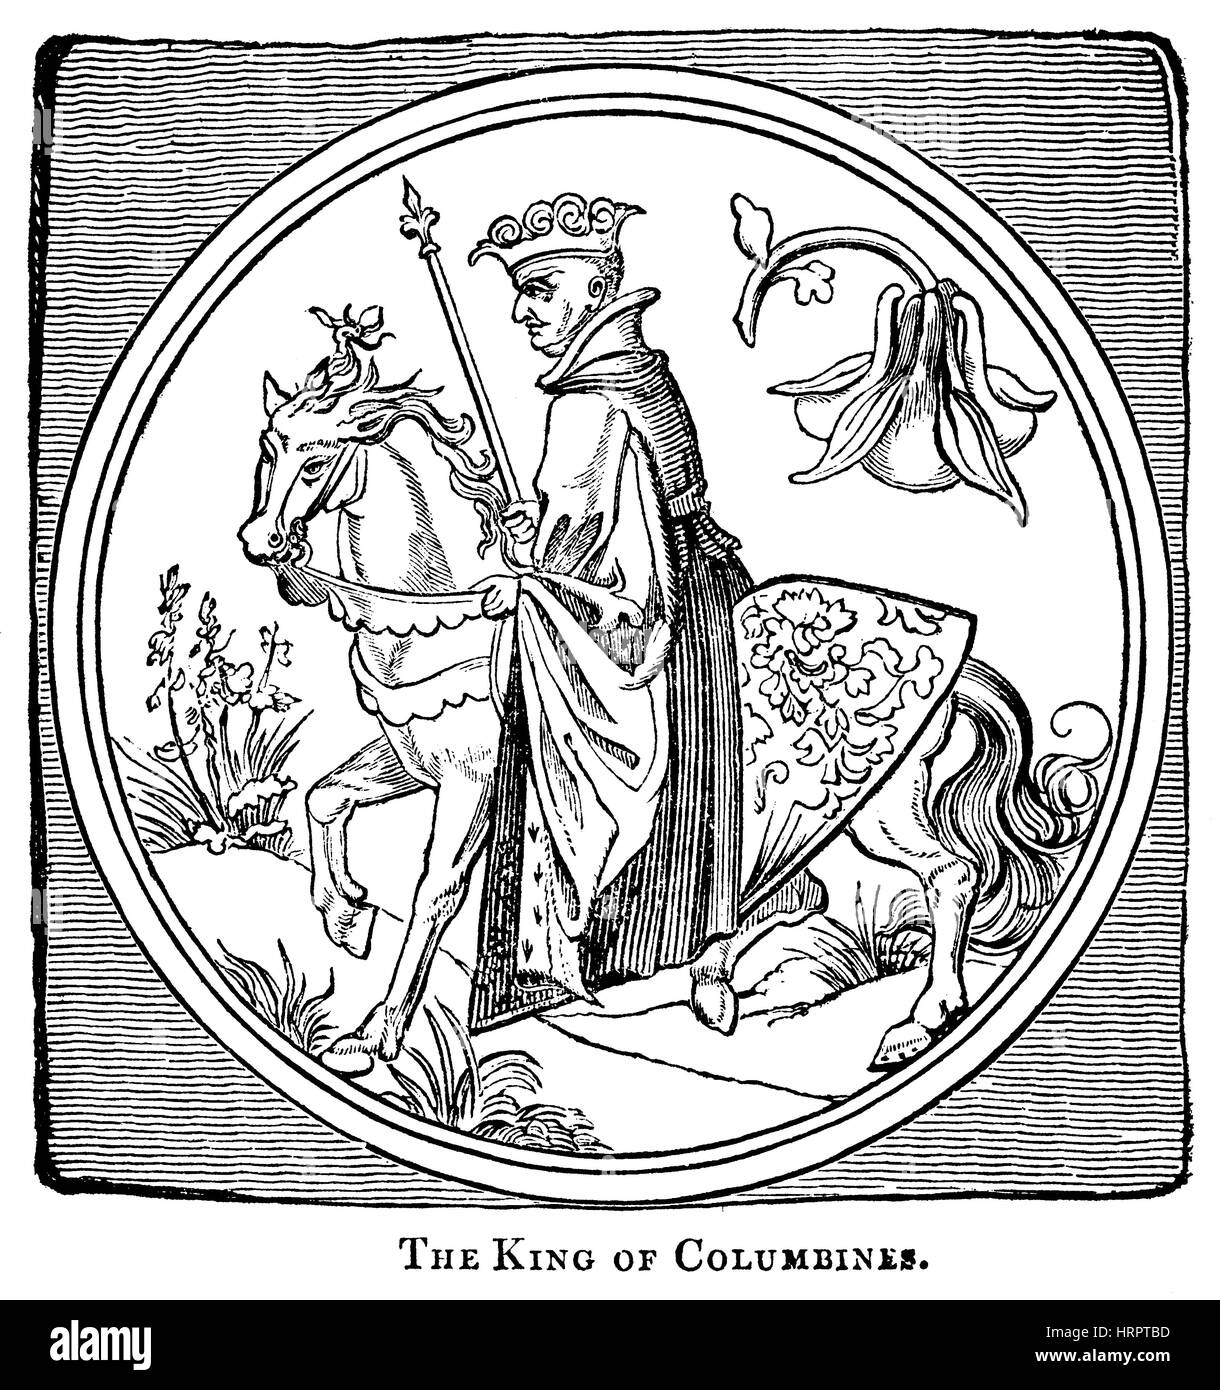 An illustration of The King of Columbines on a Playing Card in the 15th Century scanned at high resolution from a book printed in 1831. Stock Photo